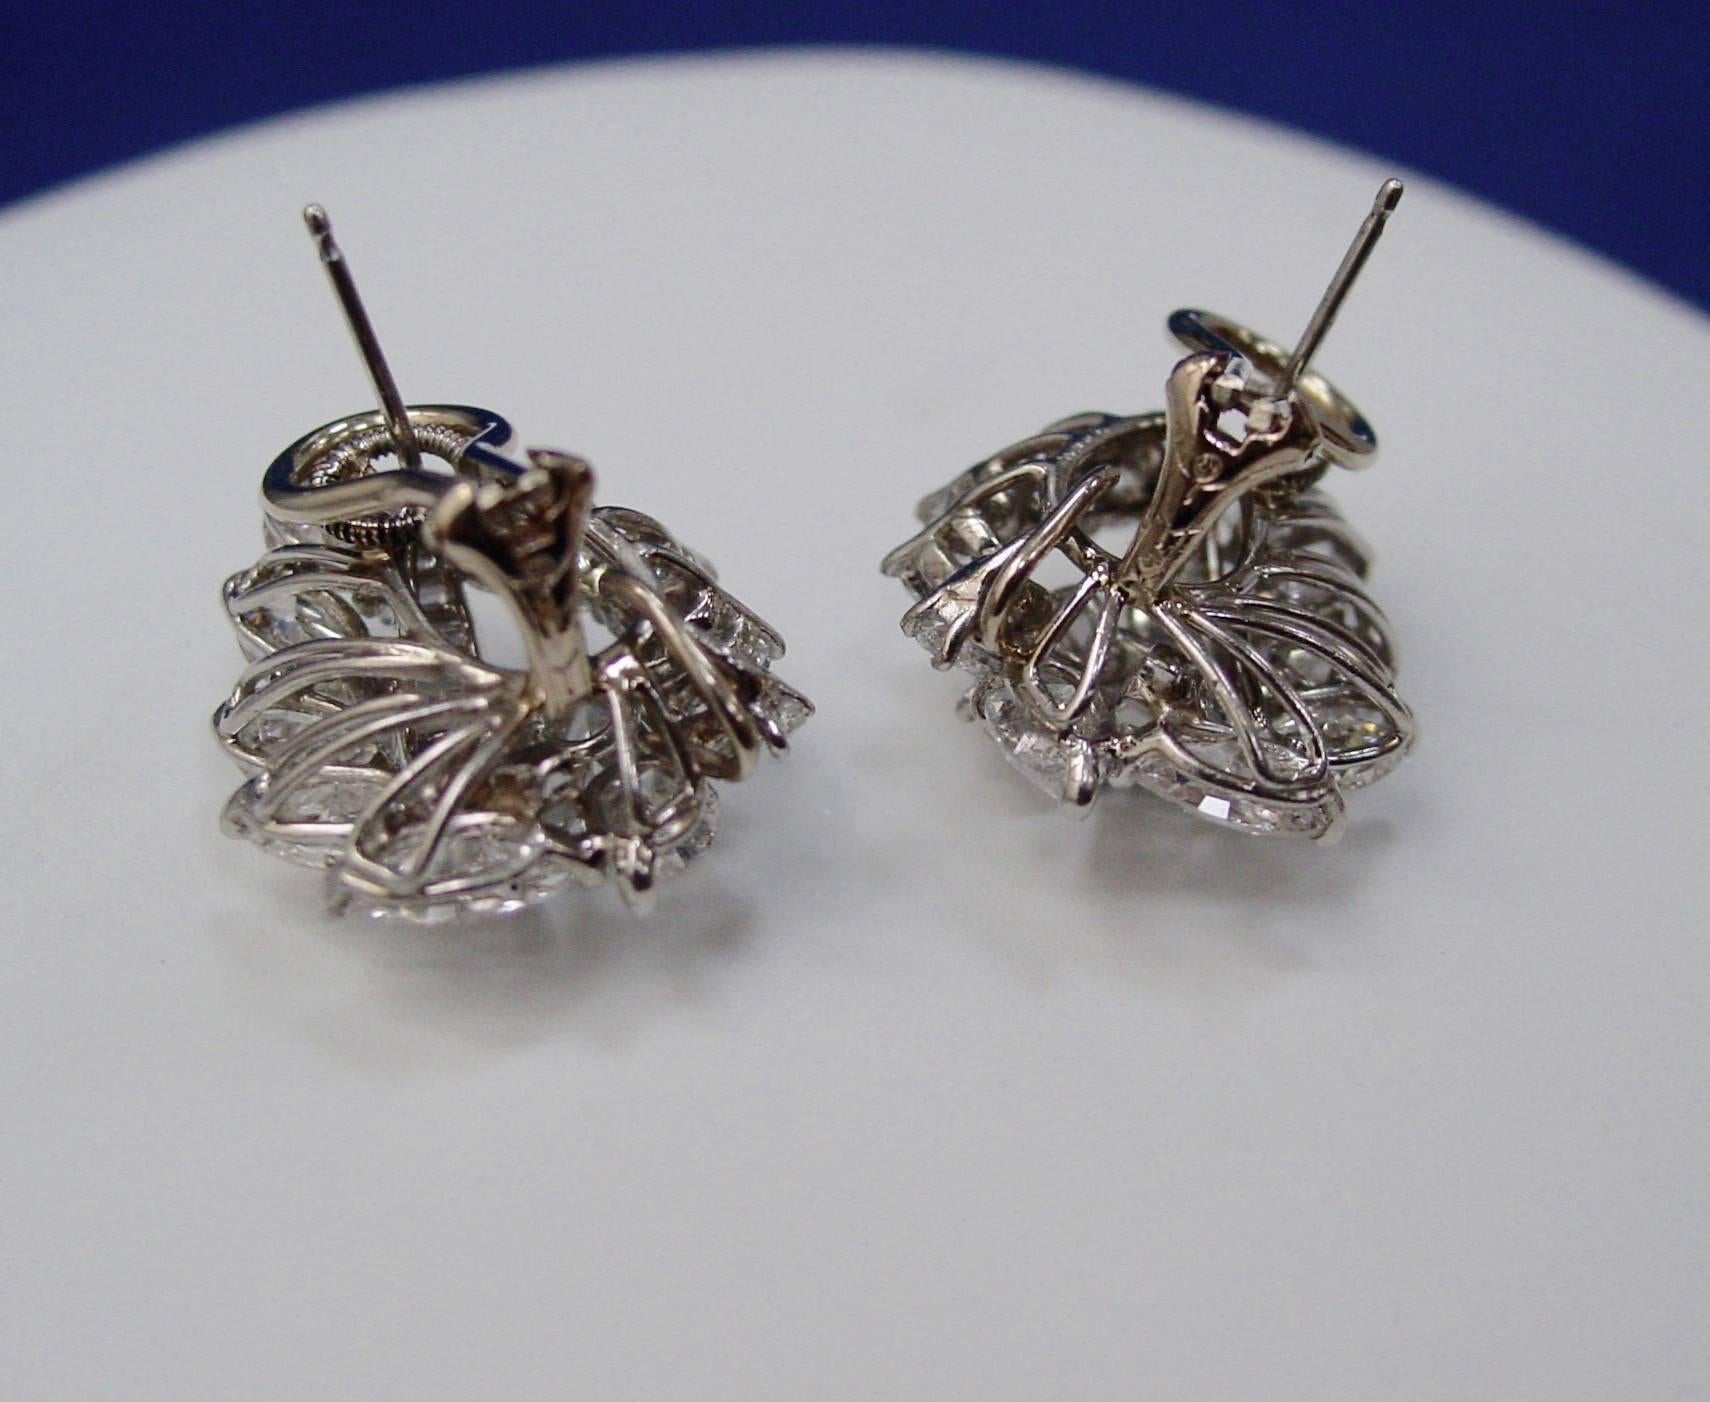  A classic pair of diamond and platinum cluster earrings by Oscar Heyman. Featuring pear, baguette and round shaped diamonds weighing approximately 9 carats in total and mounted in platinum with omega-style clip backs with maker's mark for Oscar